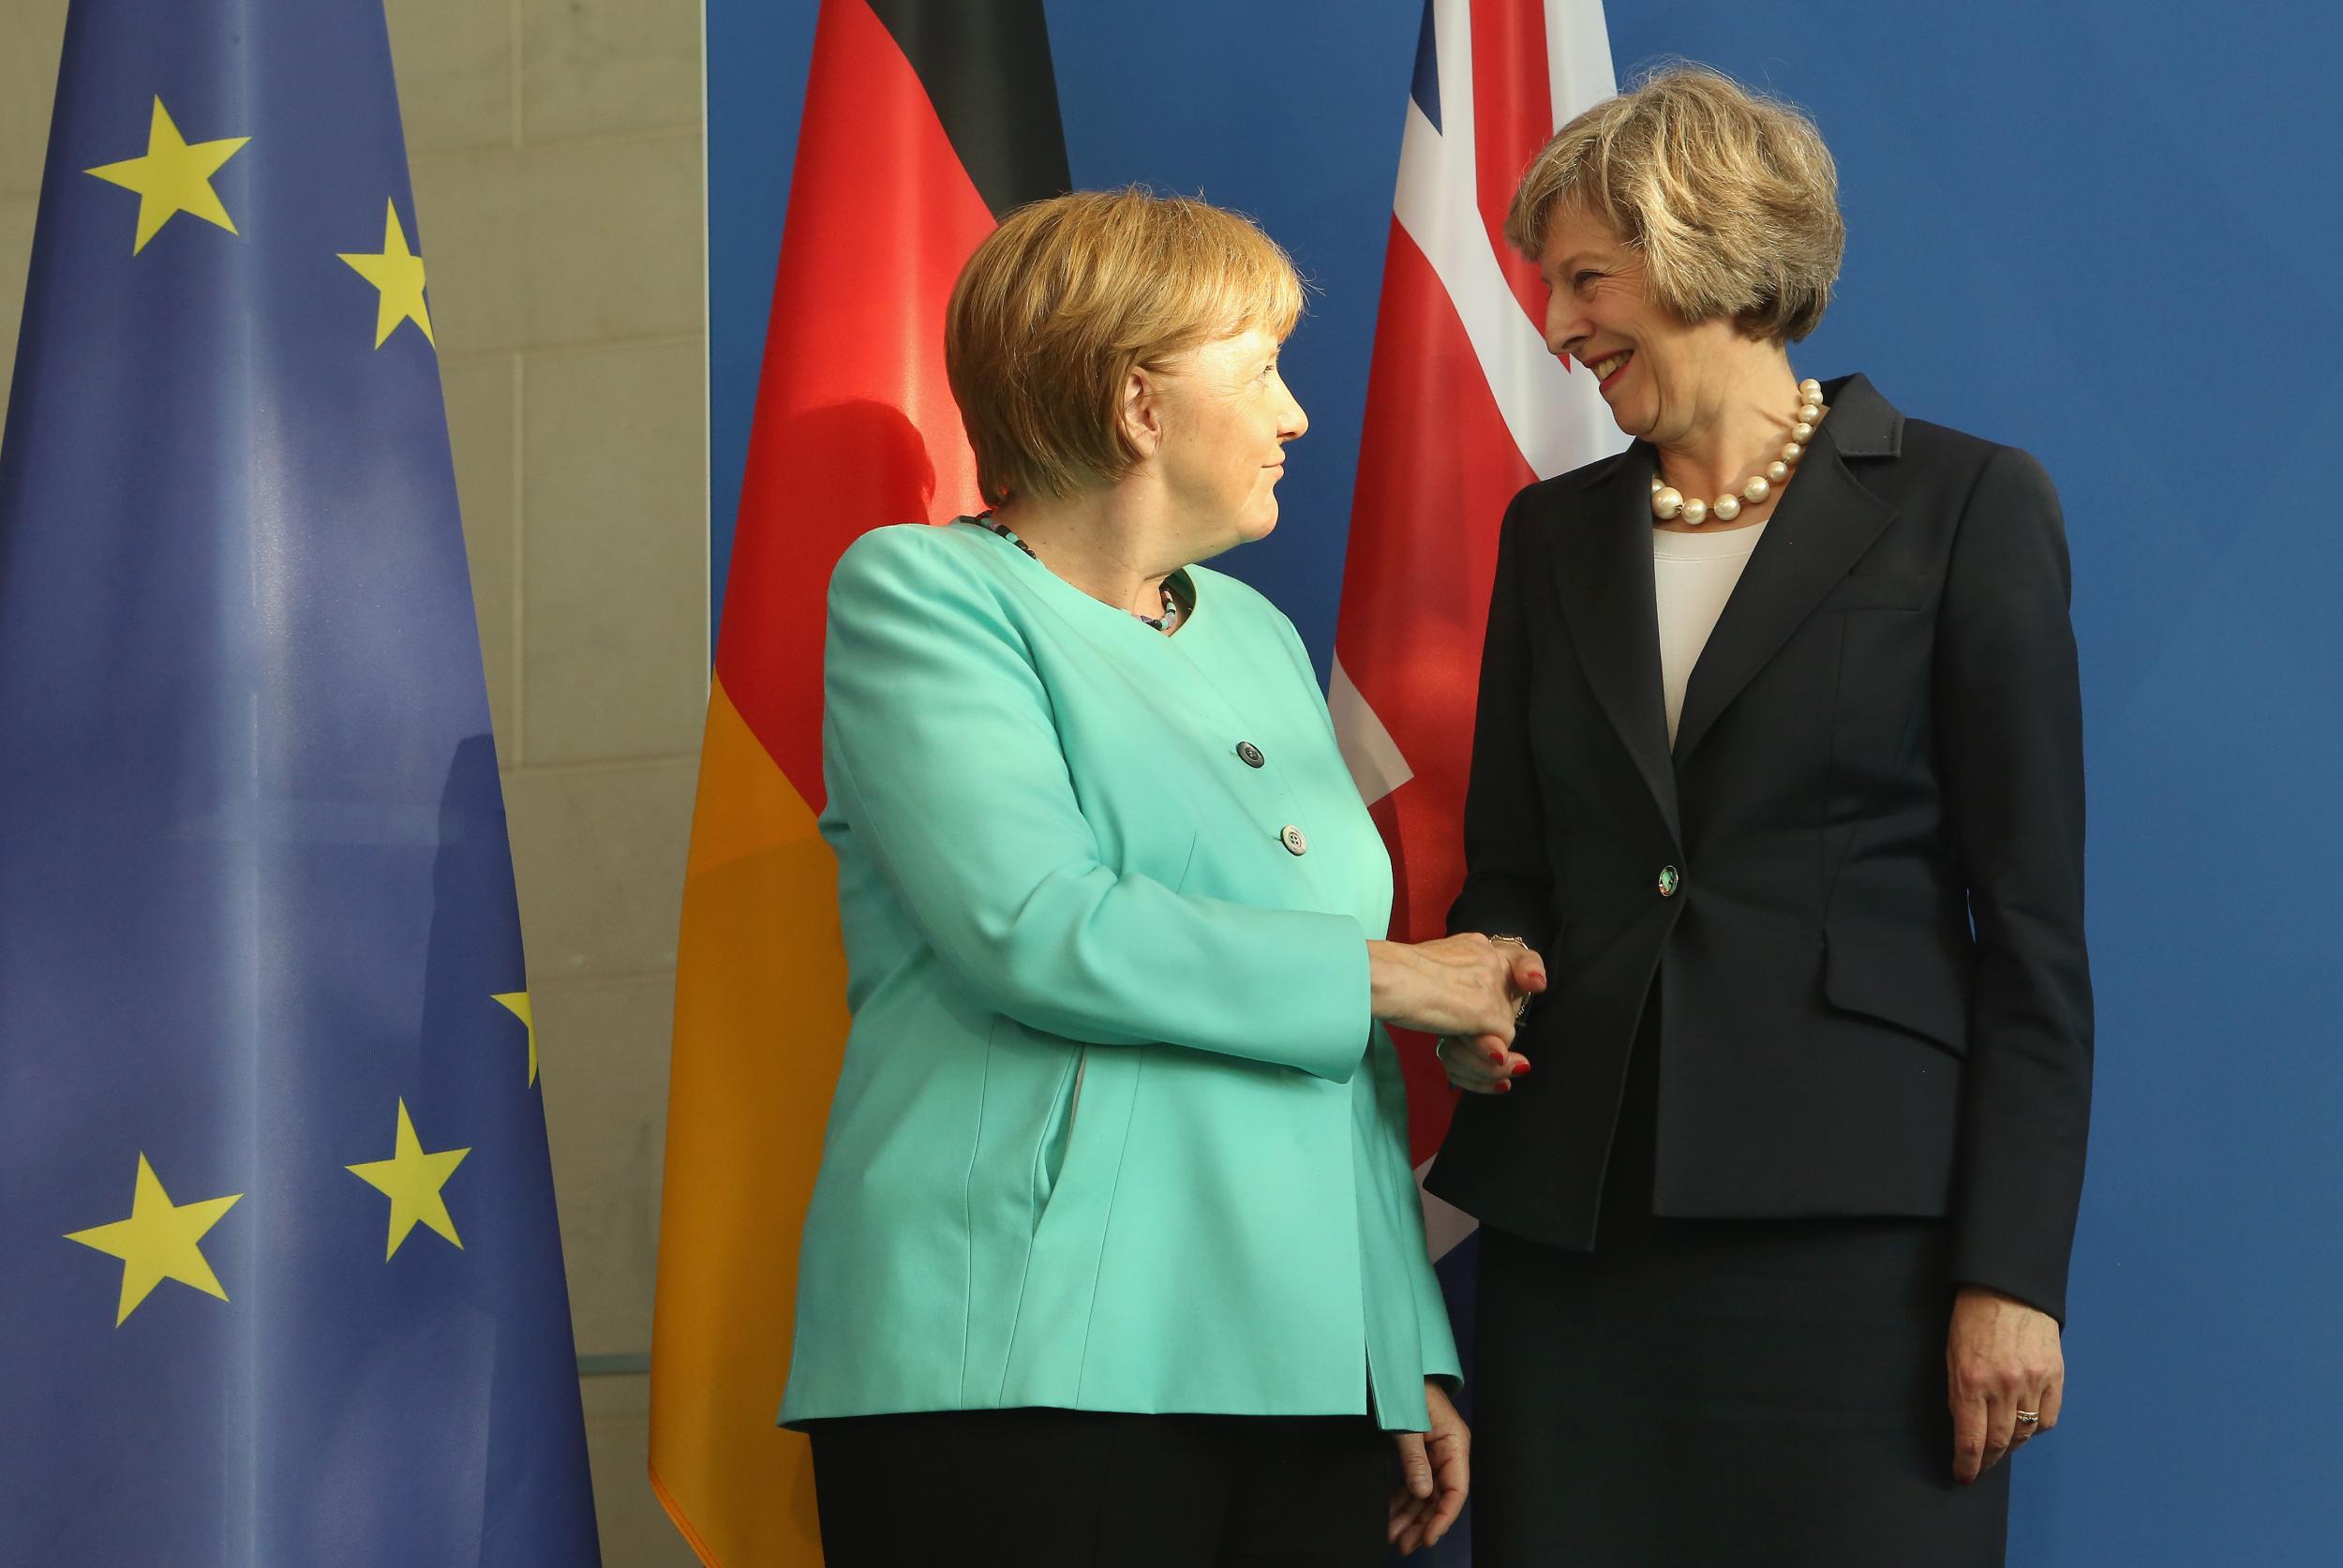 Negotiations between German Chancellor Angela Merkel and British Prime Minister Theresa May over Brexit won't cover every effect of the process for Britain